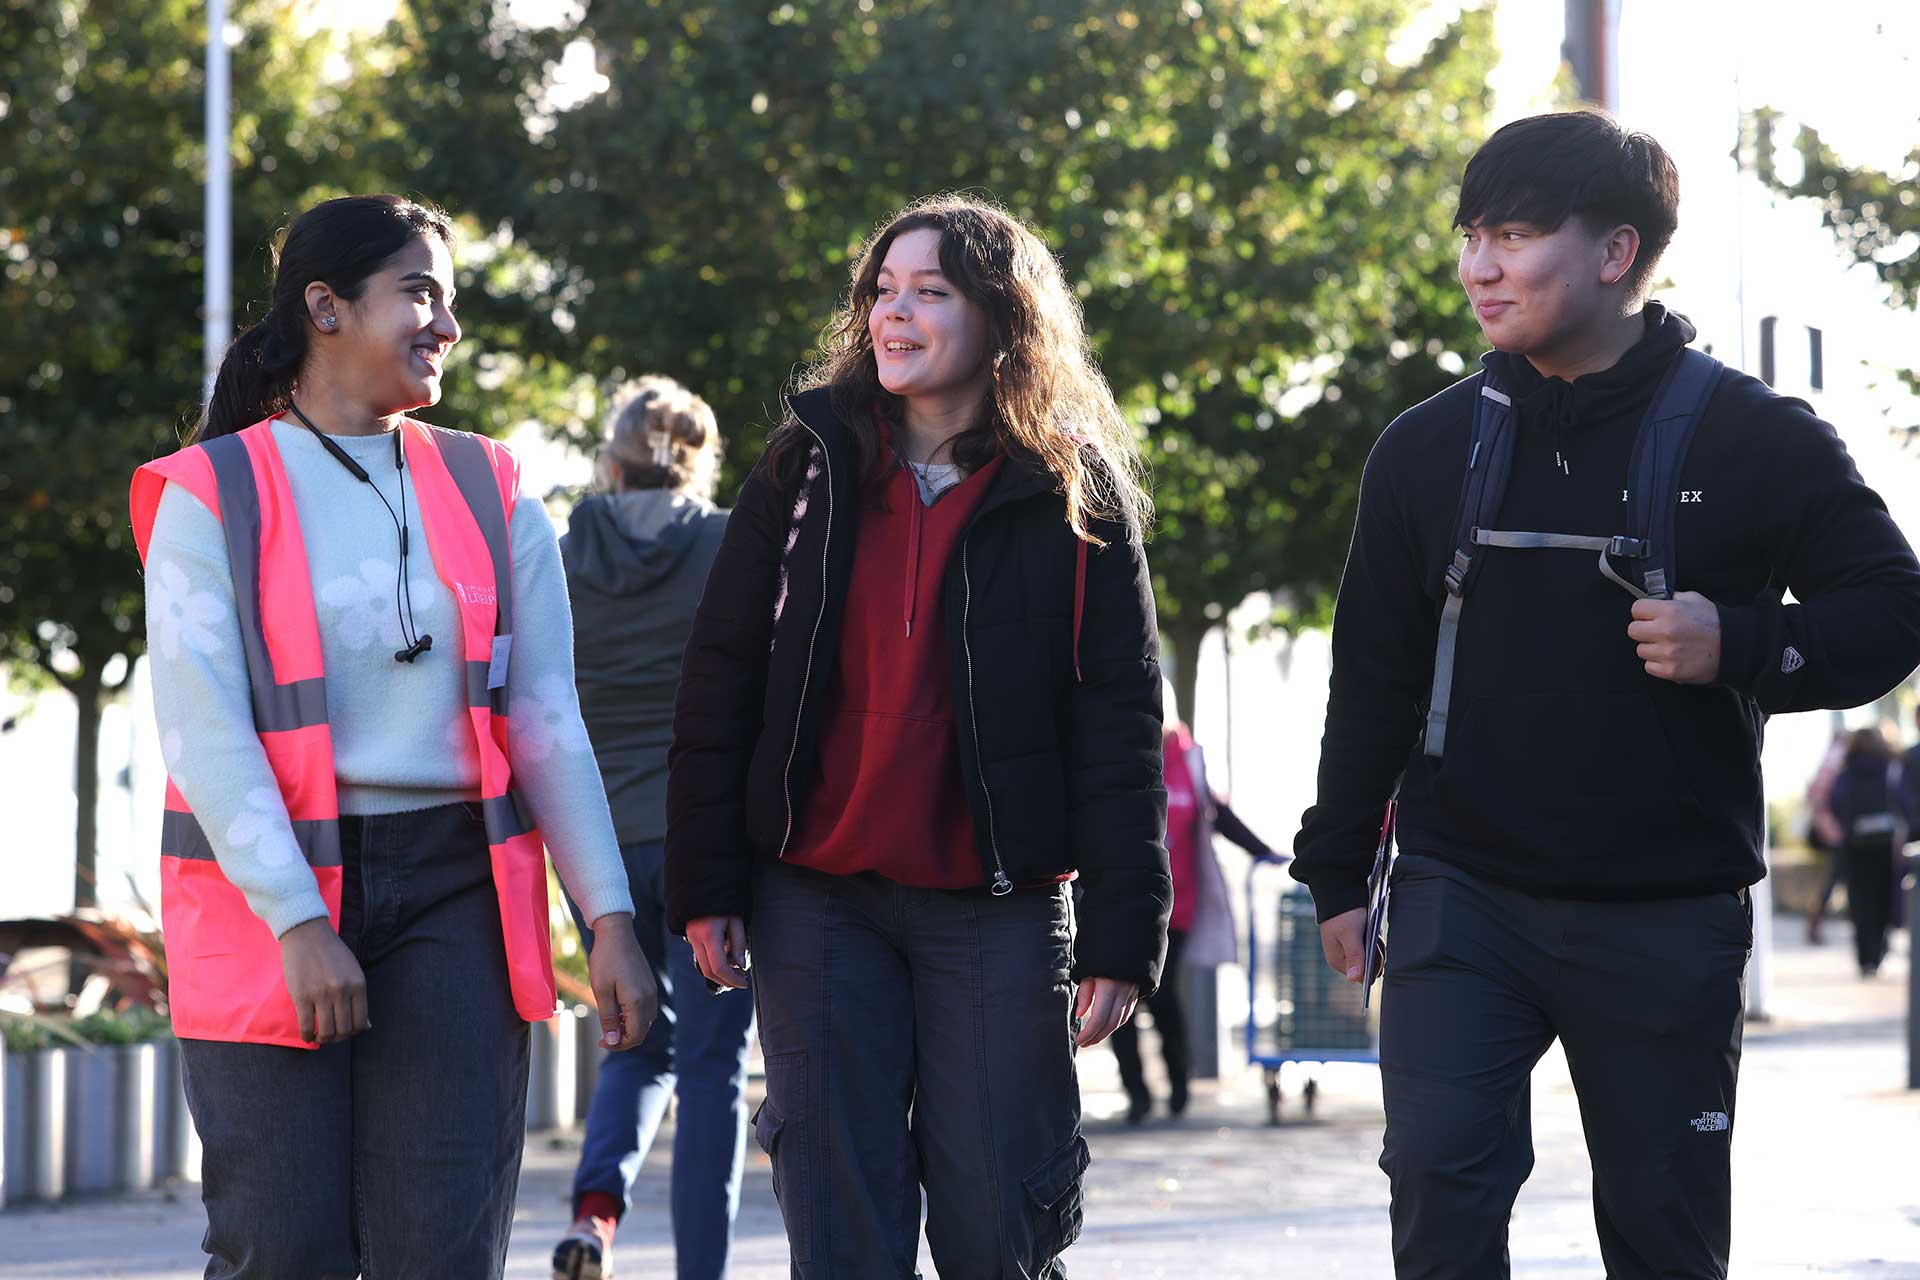 Two prospective students on a campus tour with a student guide during an open day.